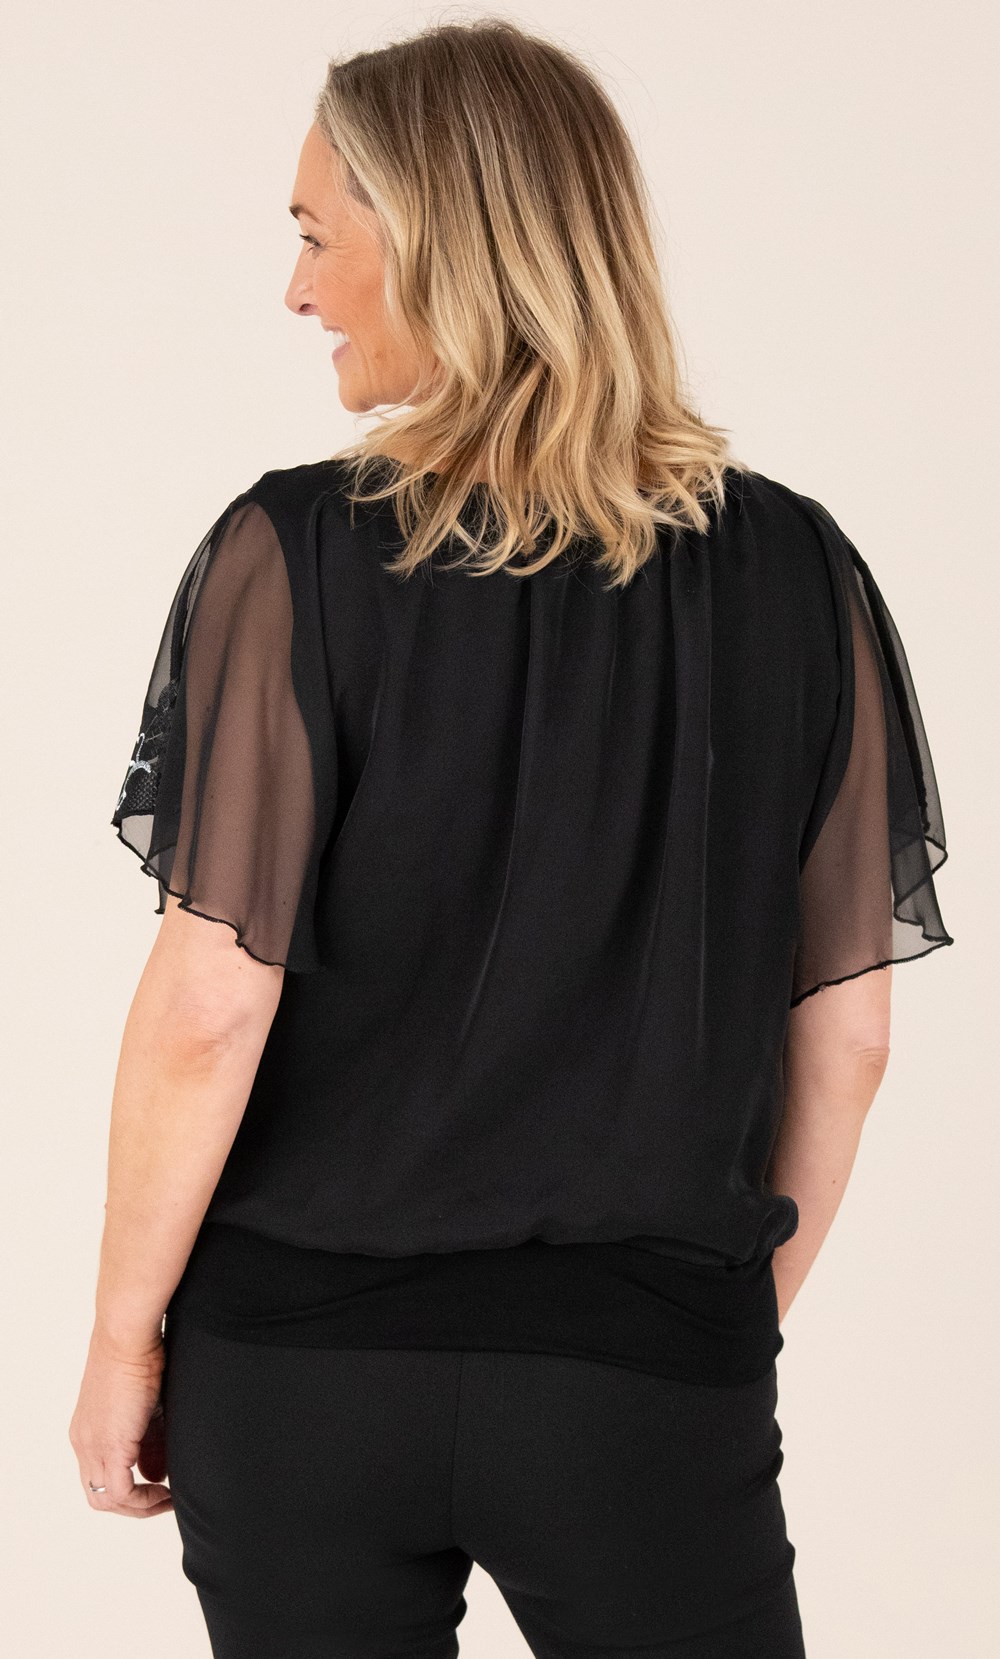 Embroidered Chiffon Overlay Top